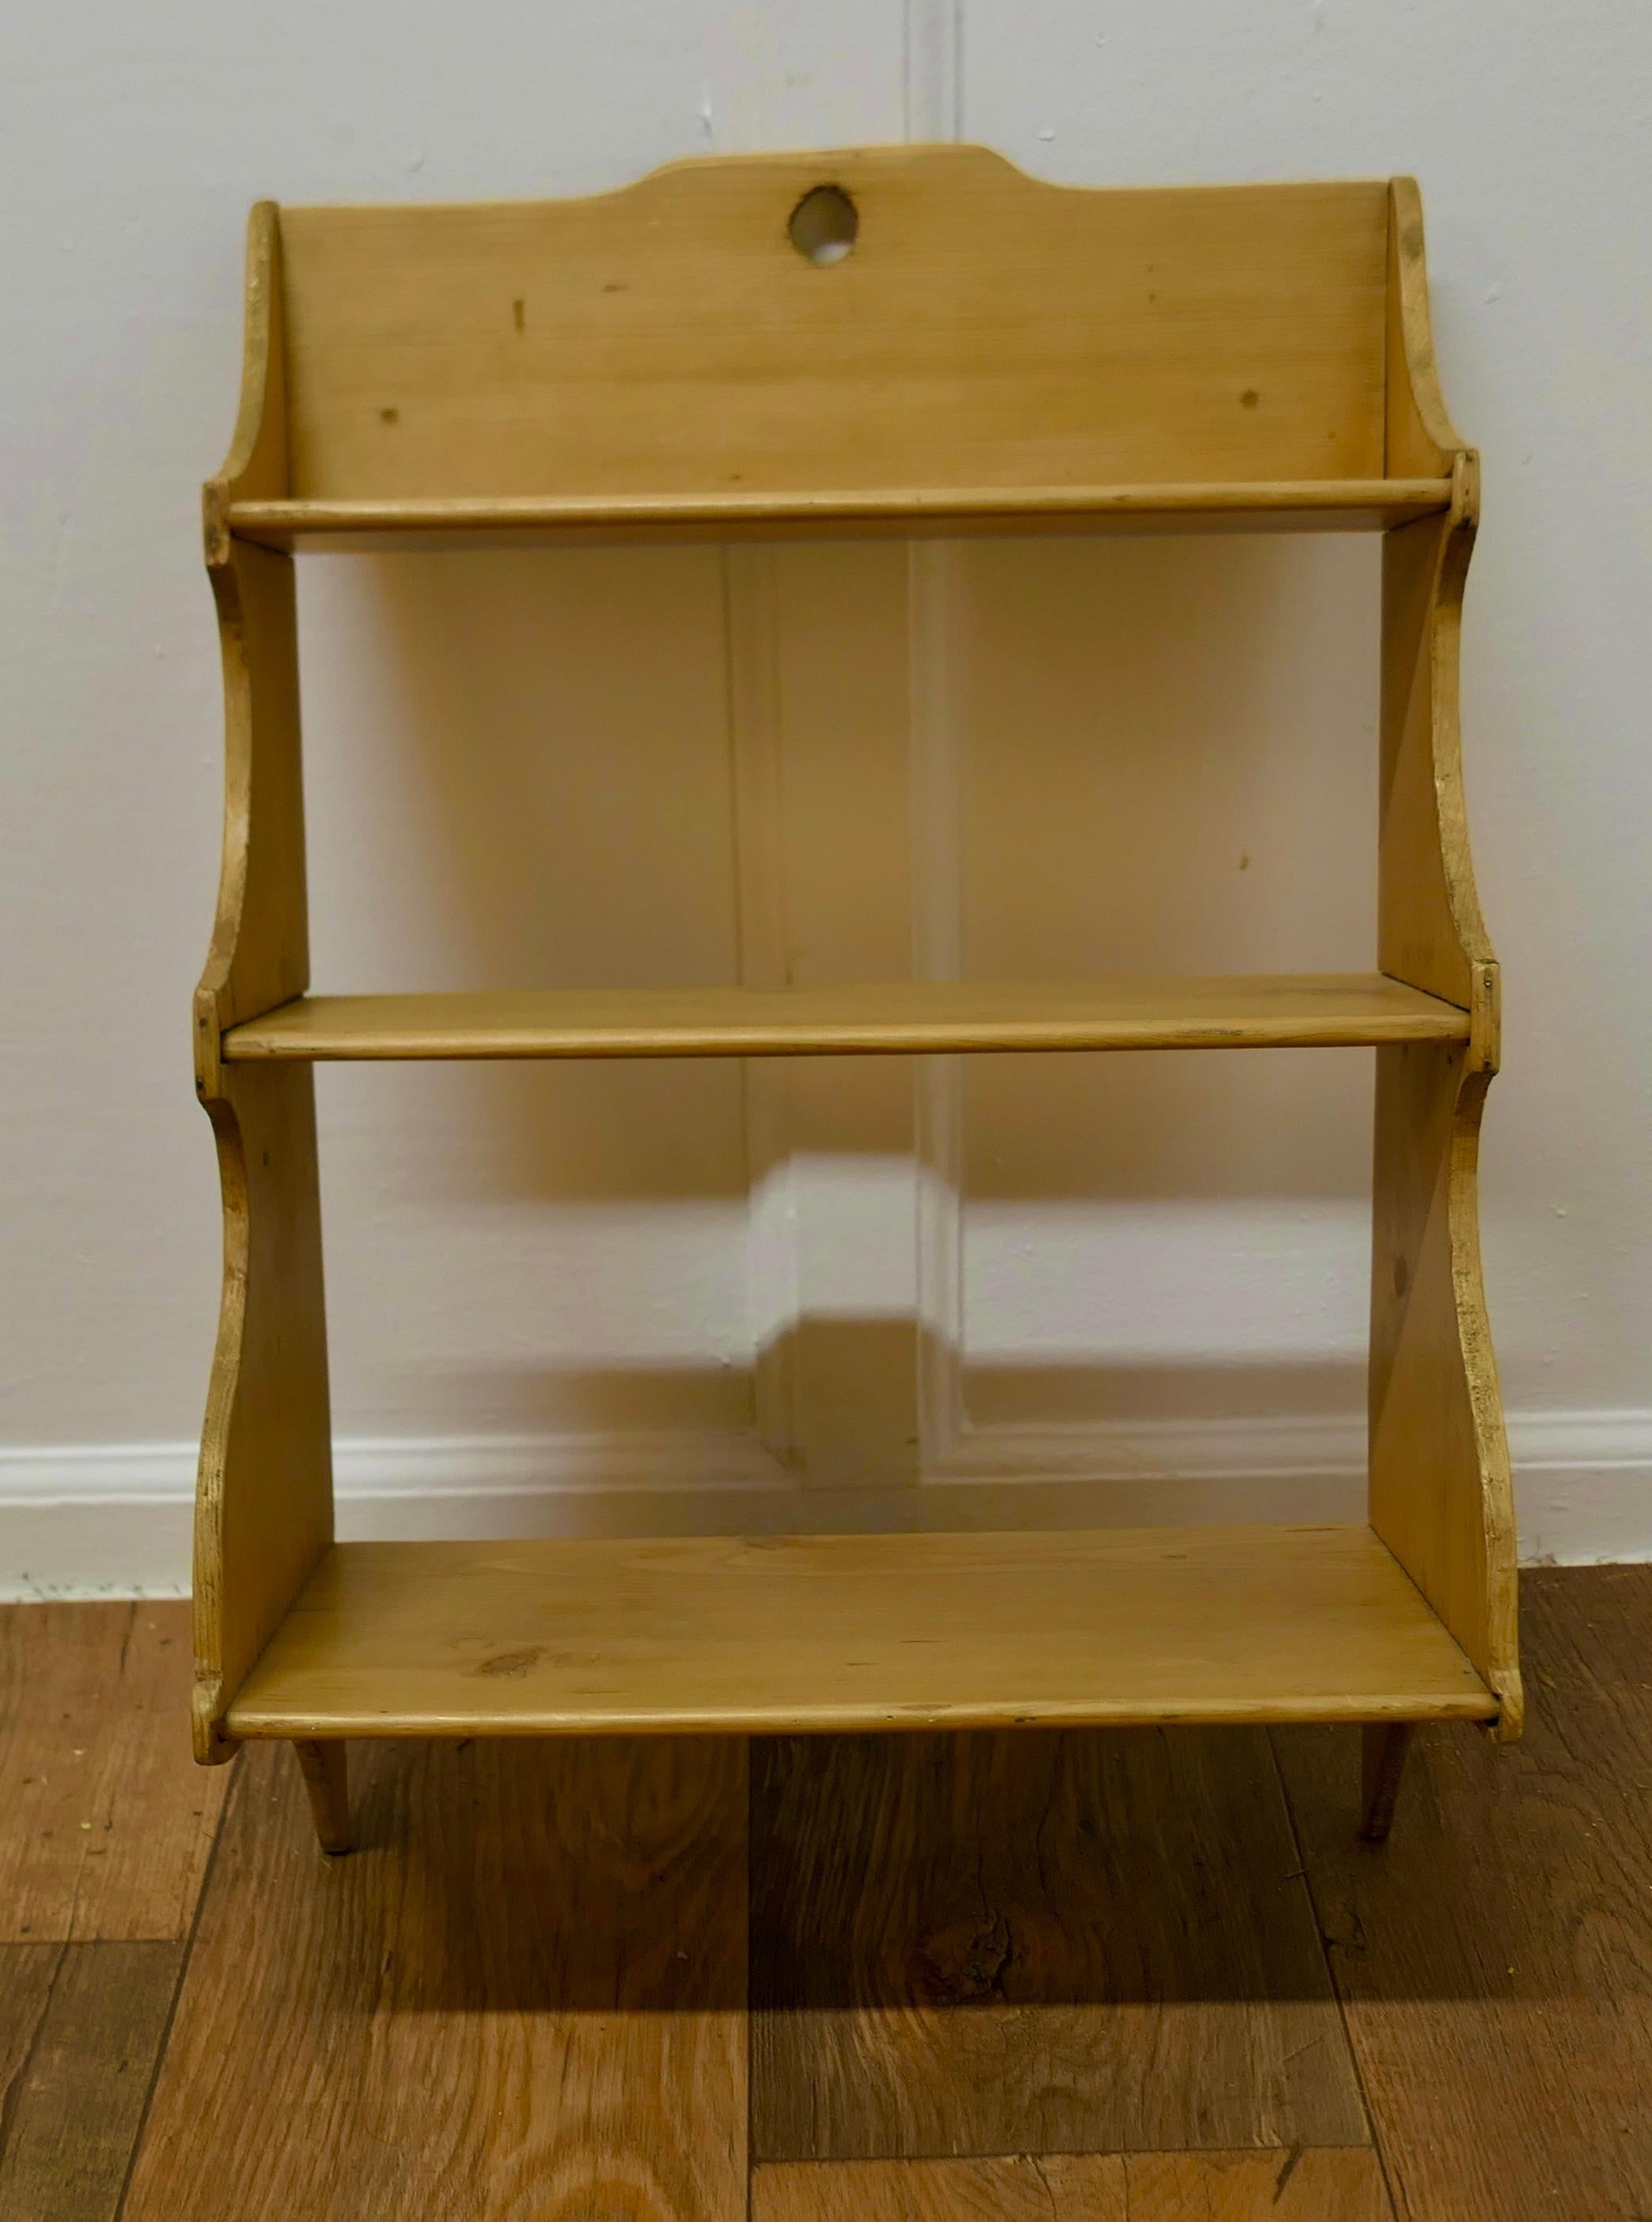 Rustic Pine Wall Hanging Book Shelf In Good Condition For Sale In Chillerton, Isle of Wight